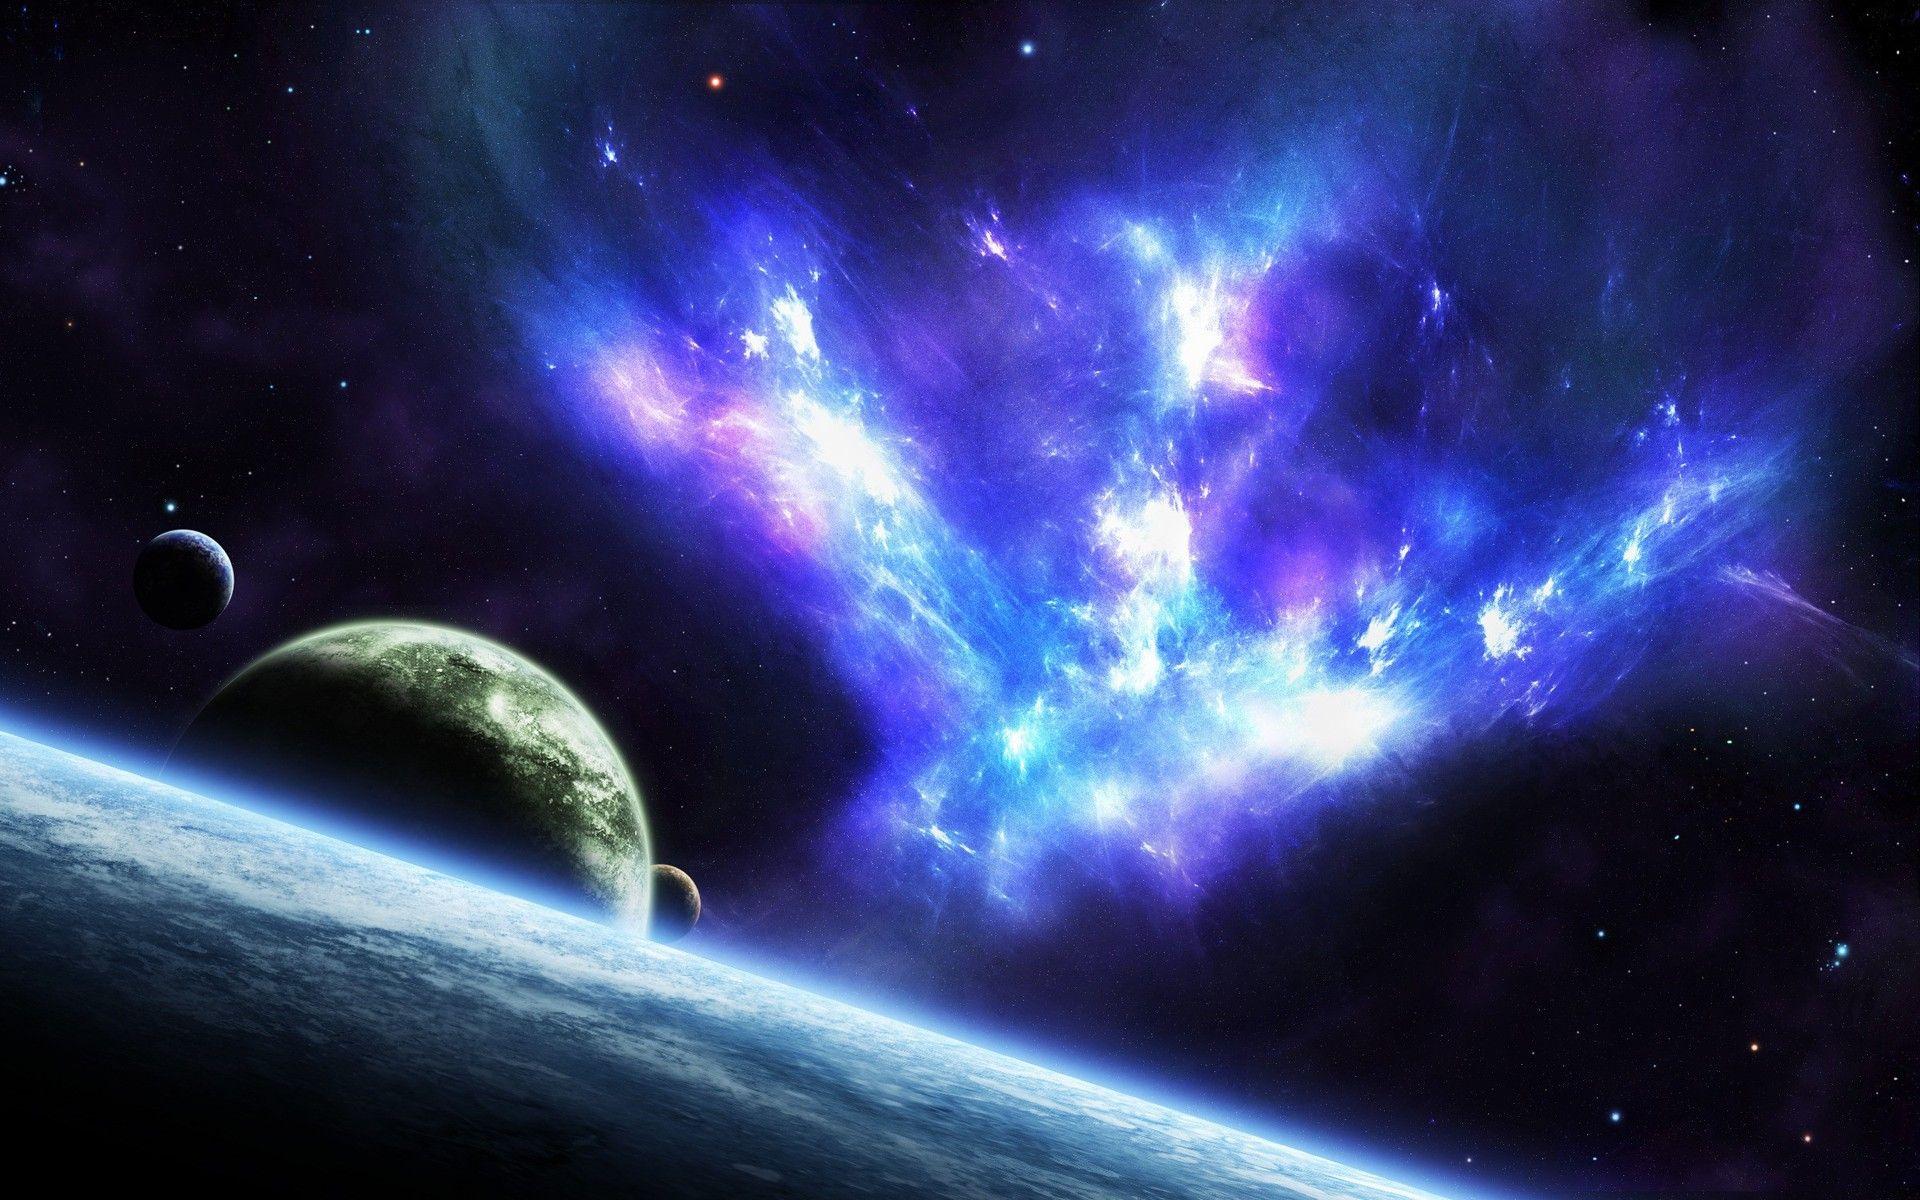 Sci Fi Space Wallpapers Top Free Sci Fi Space Backgrounds